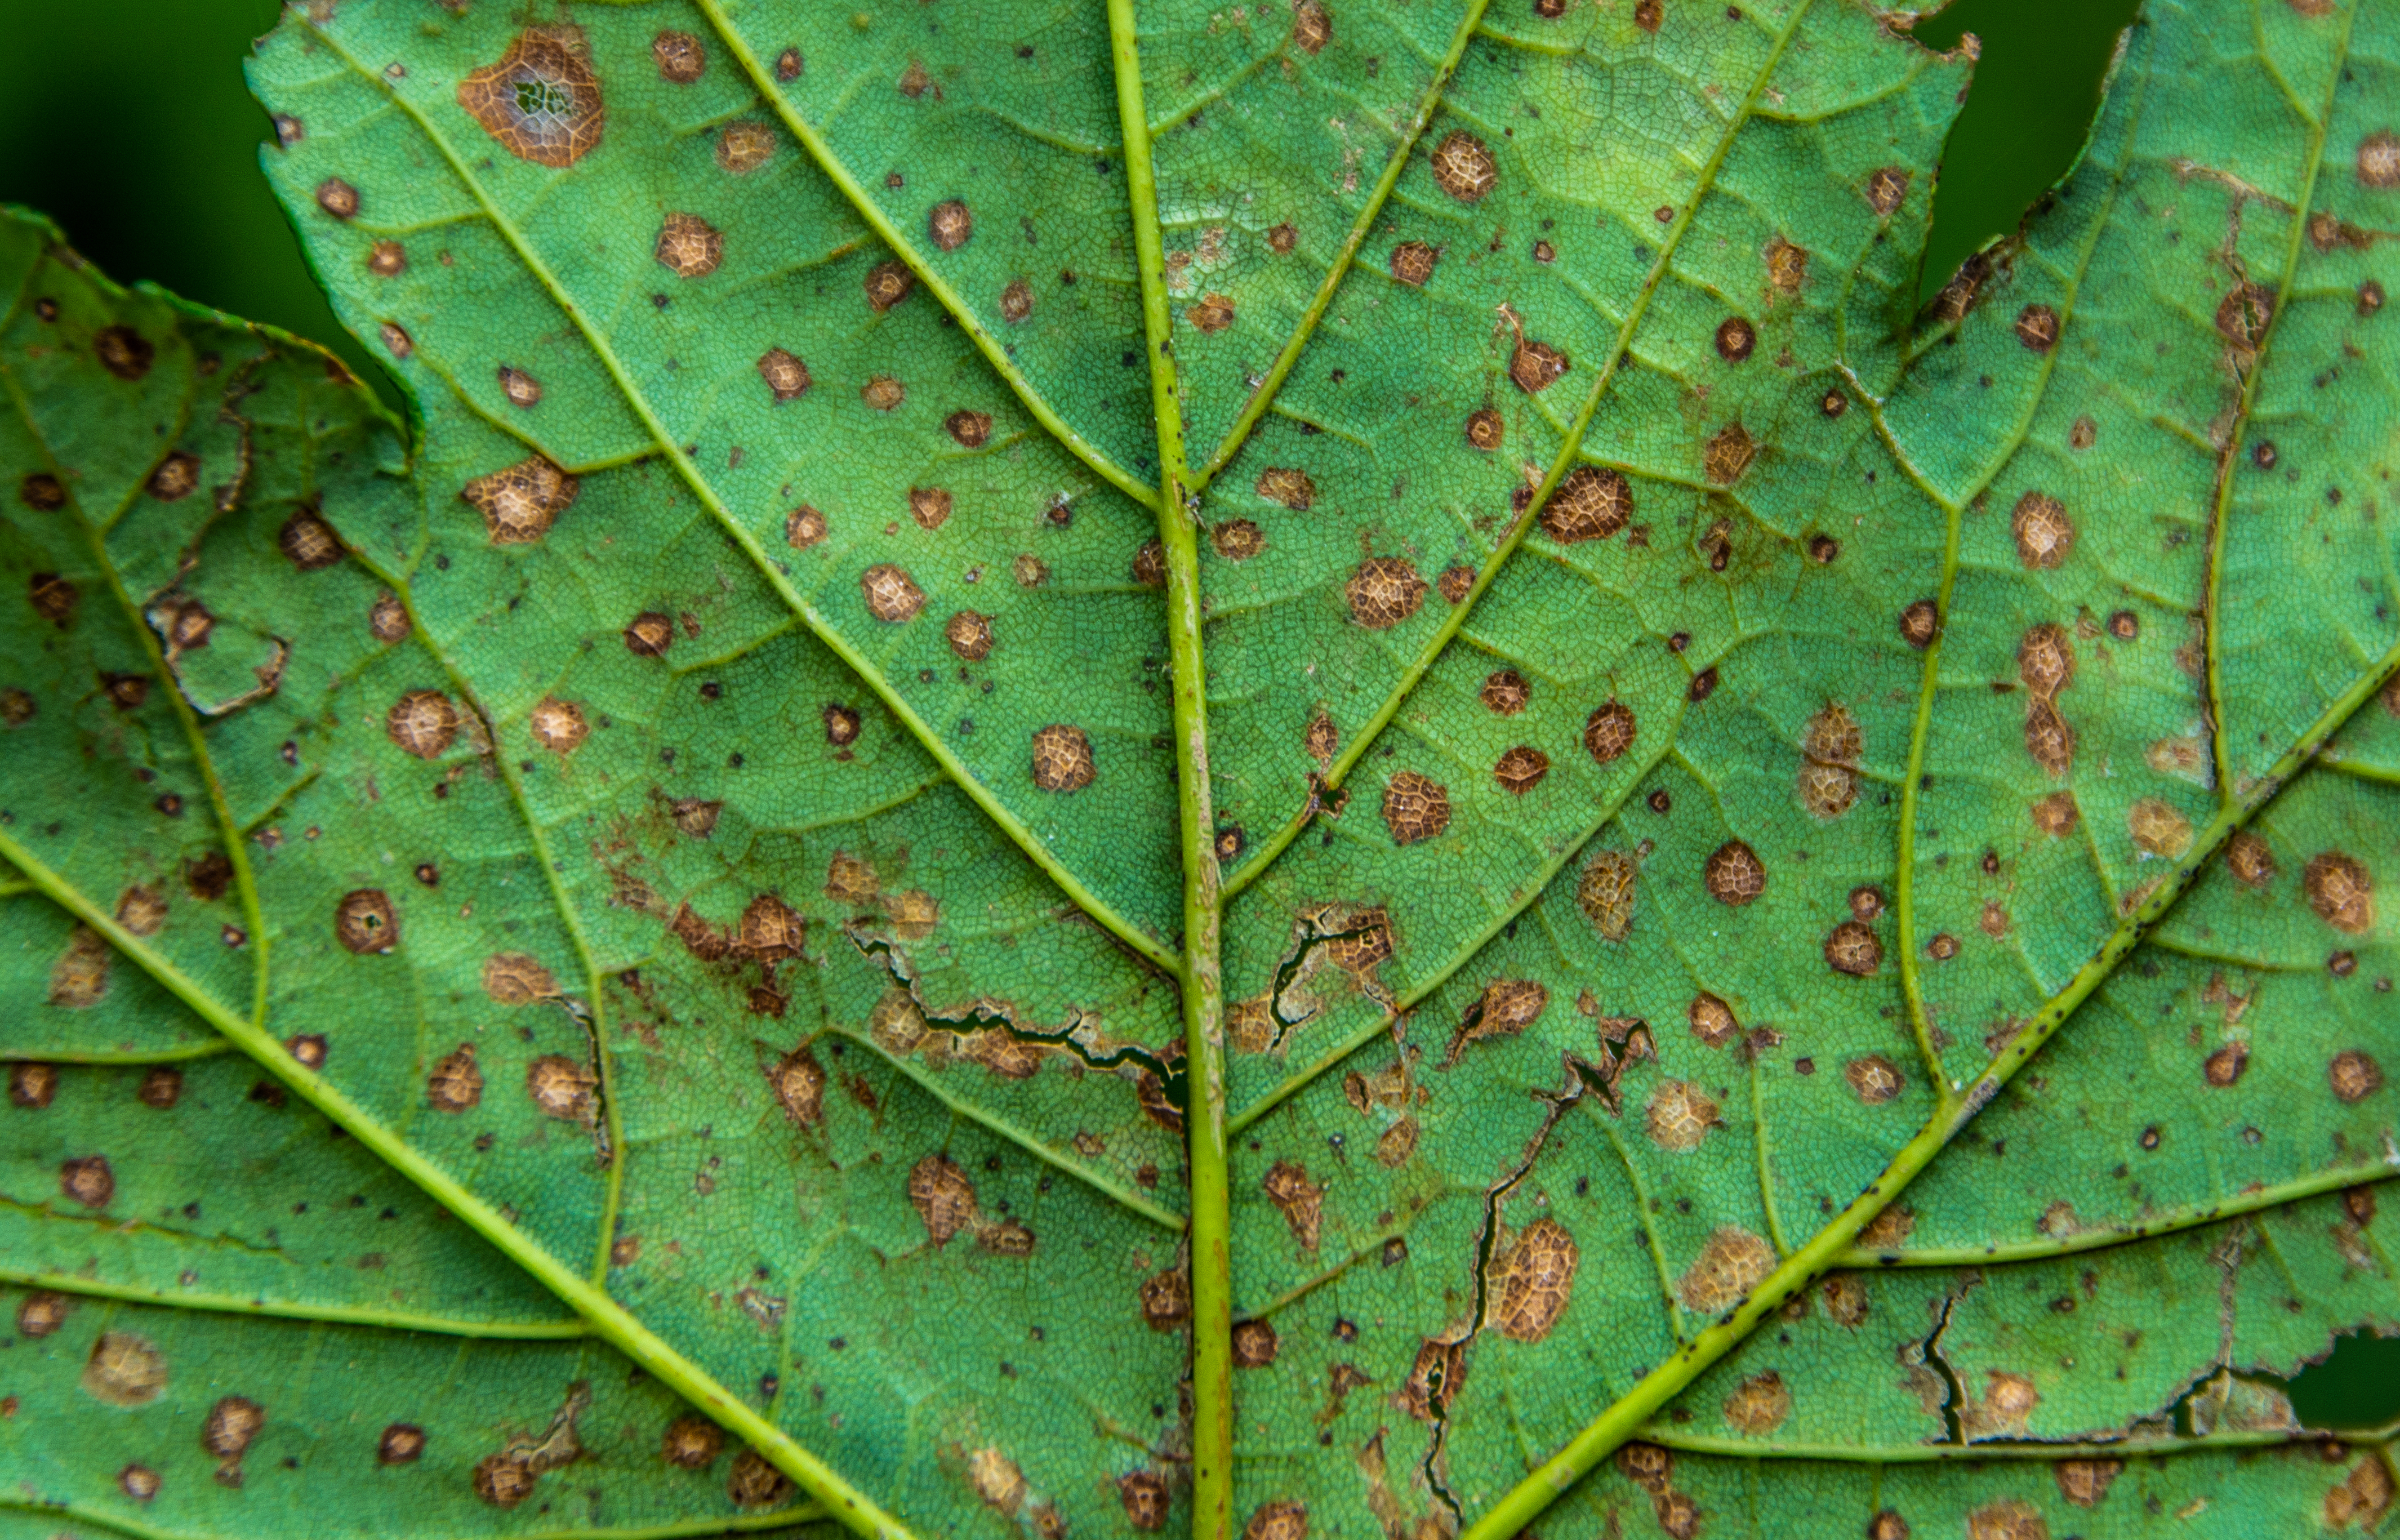 leaf attacked by a fungal disease